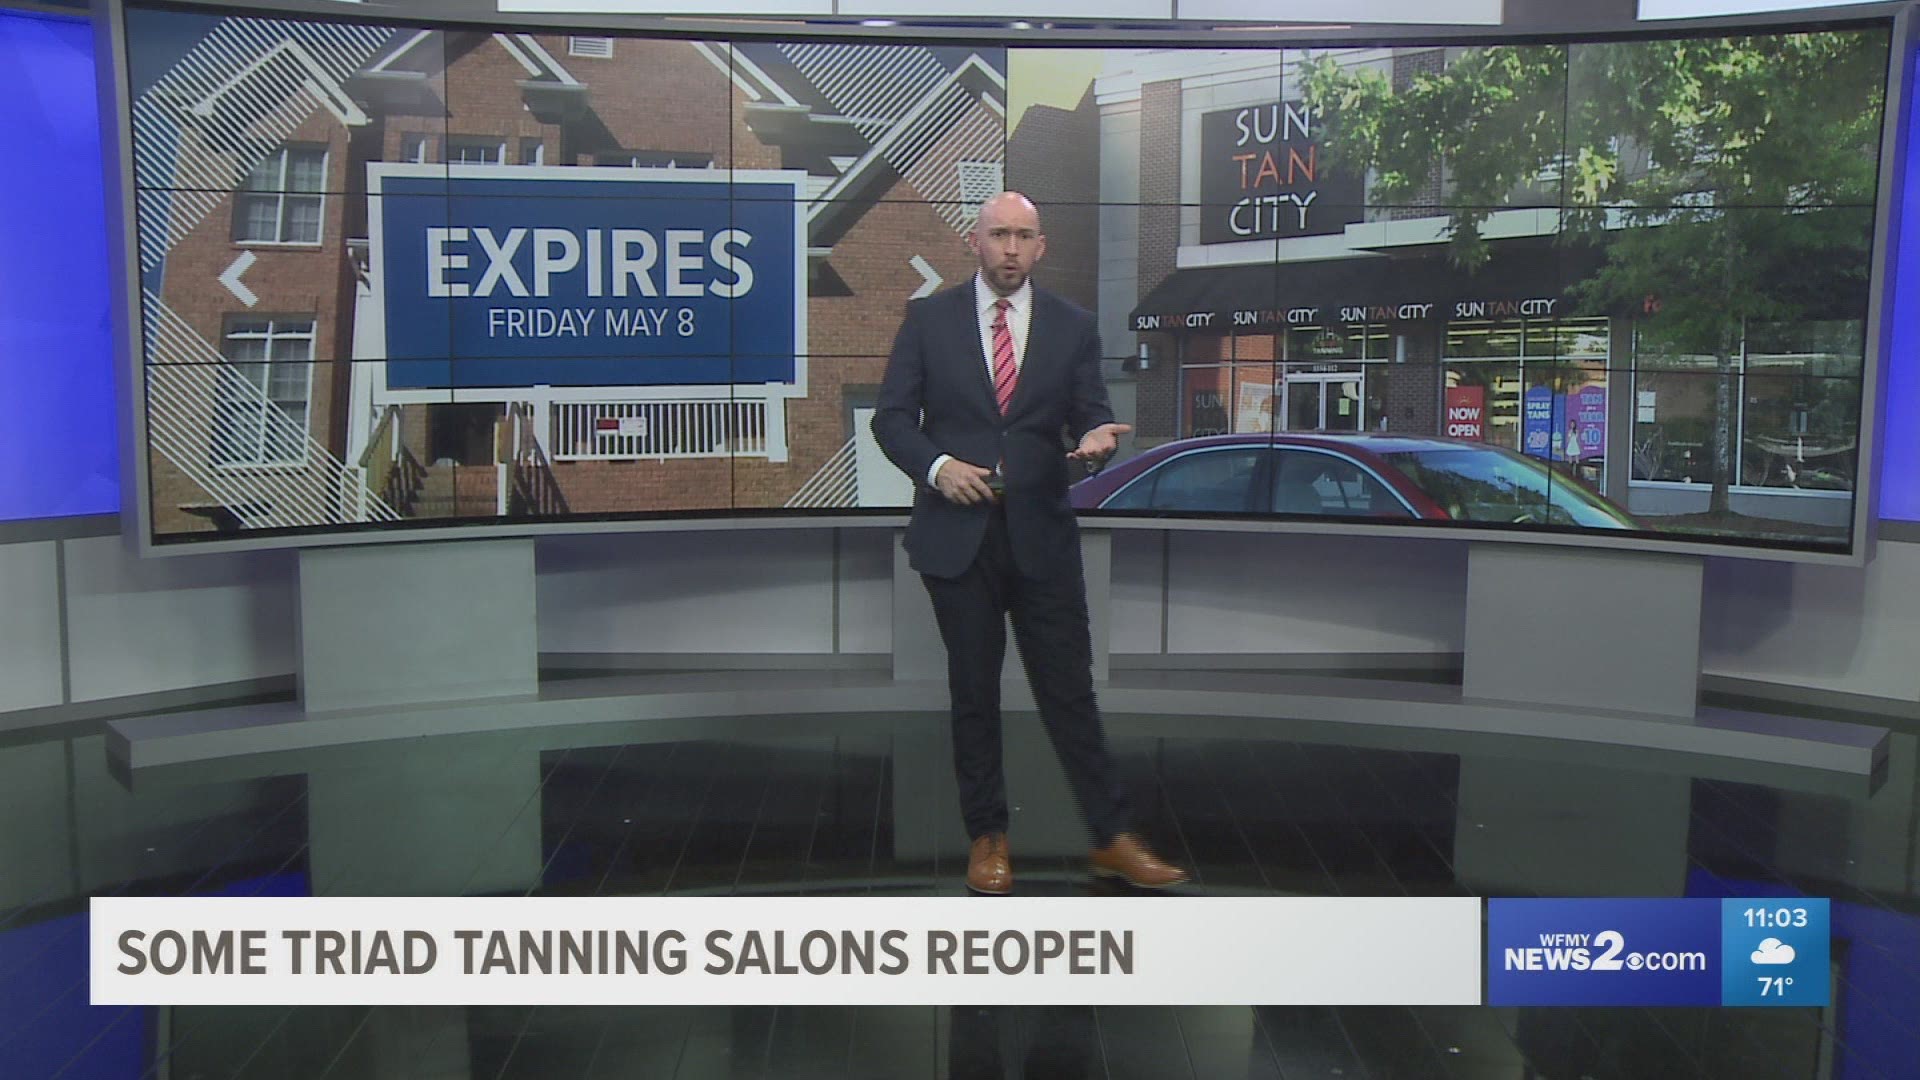 Triad tanning salons find ways to reopen before the official stay at home order is lifted in NC.